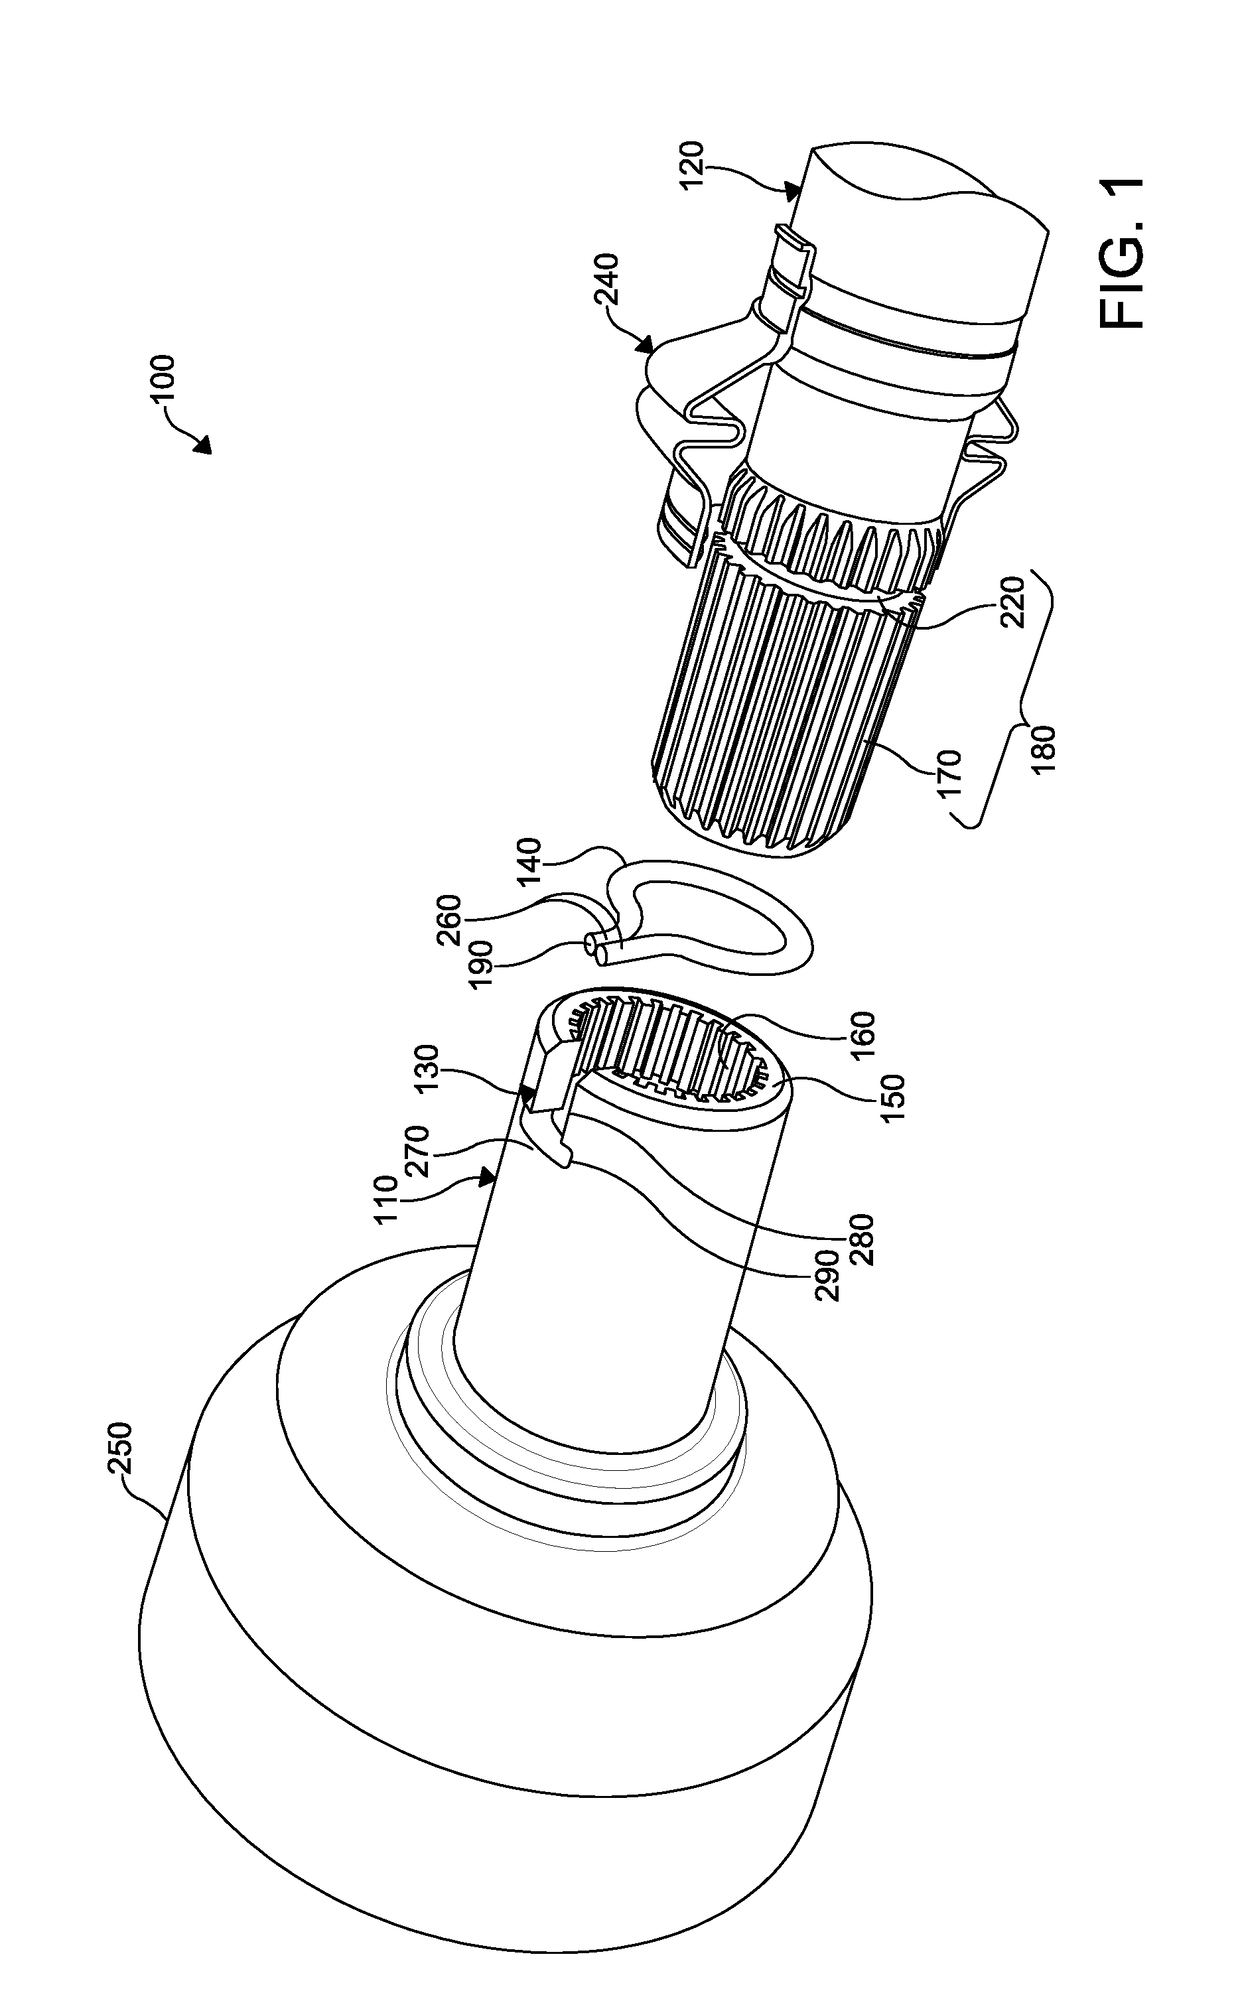 High retention force serviceable plug-on joint assembly